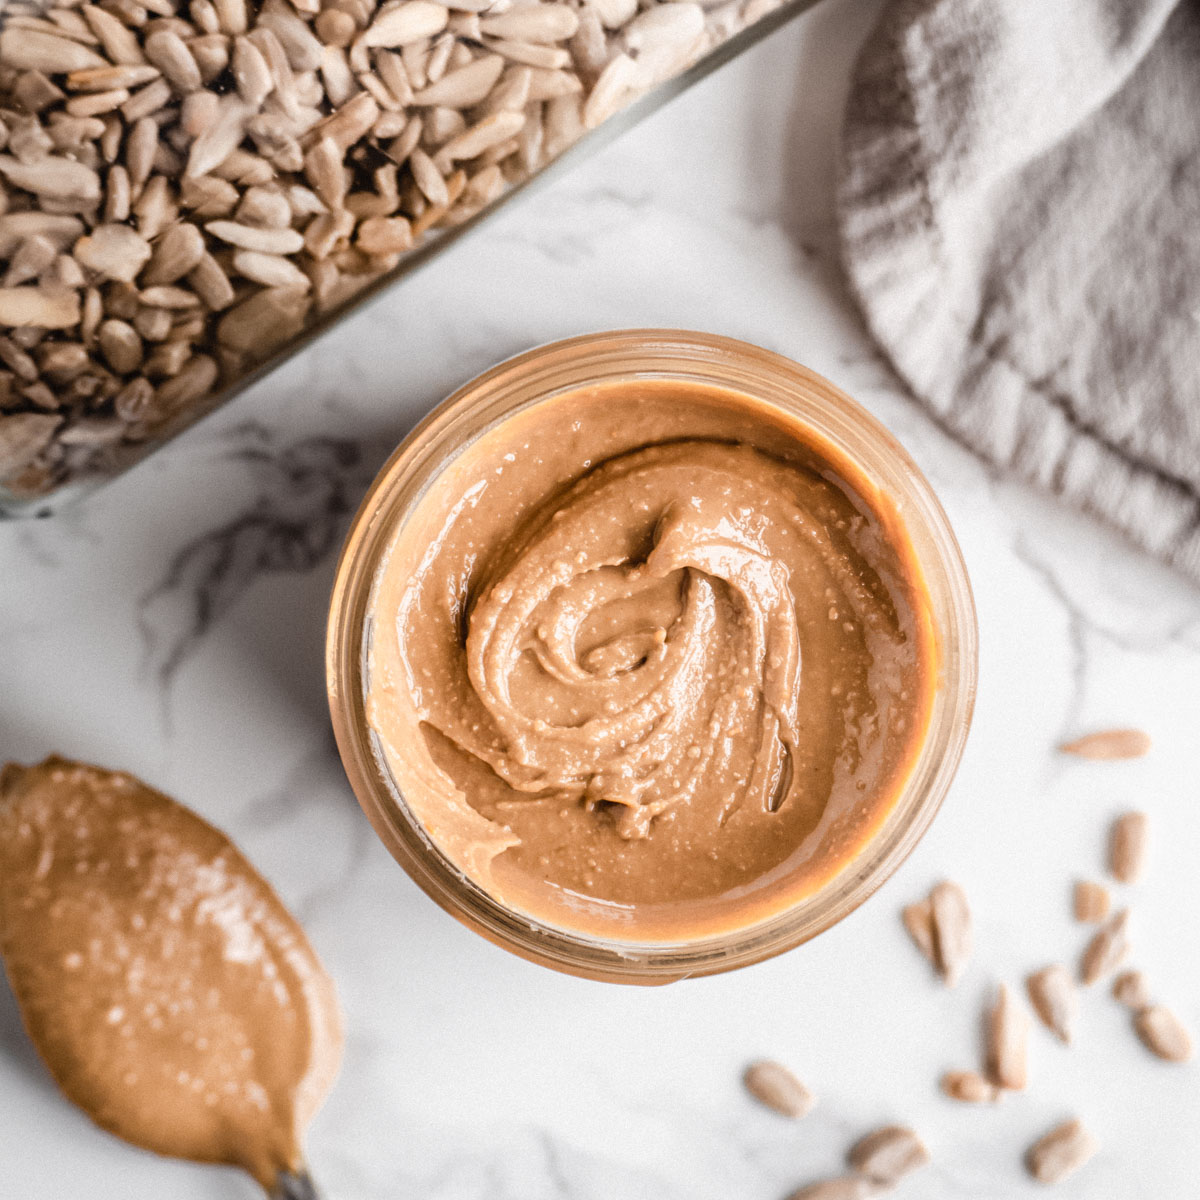 How To Make Sunflower Seed Butter